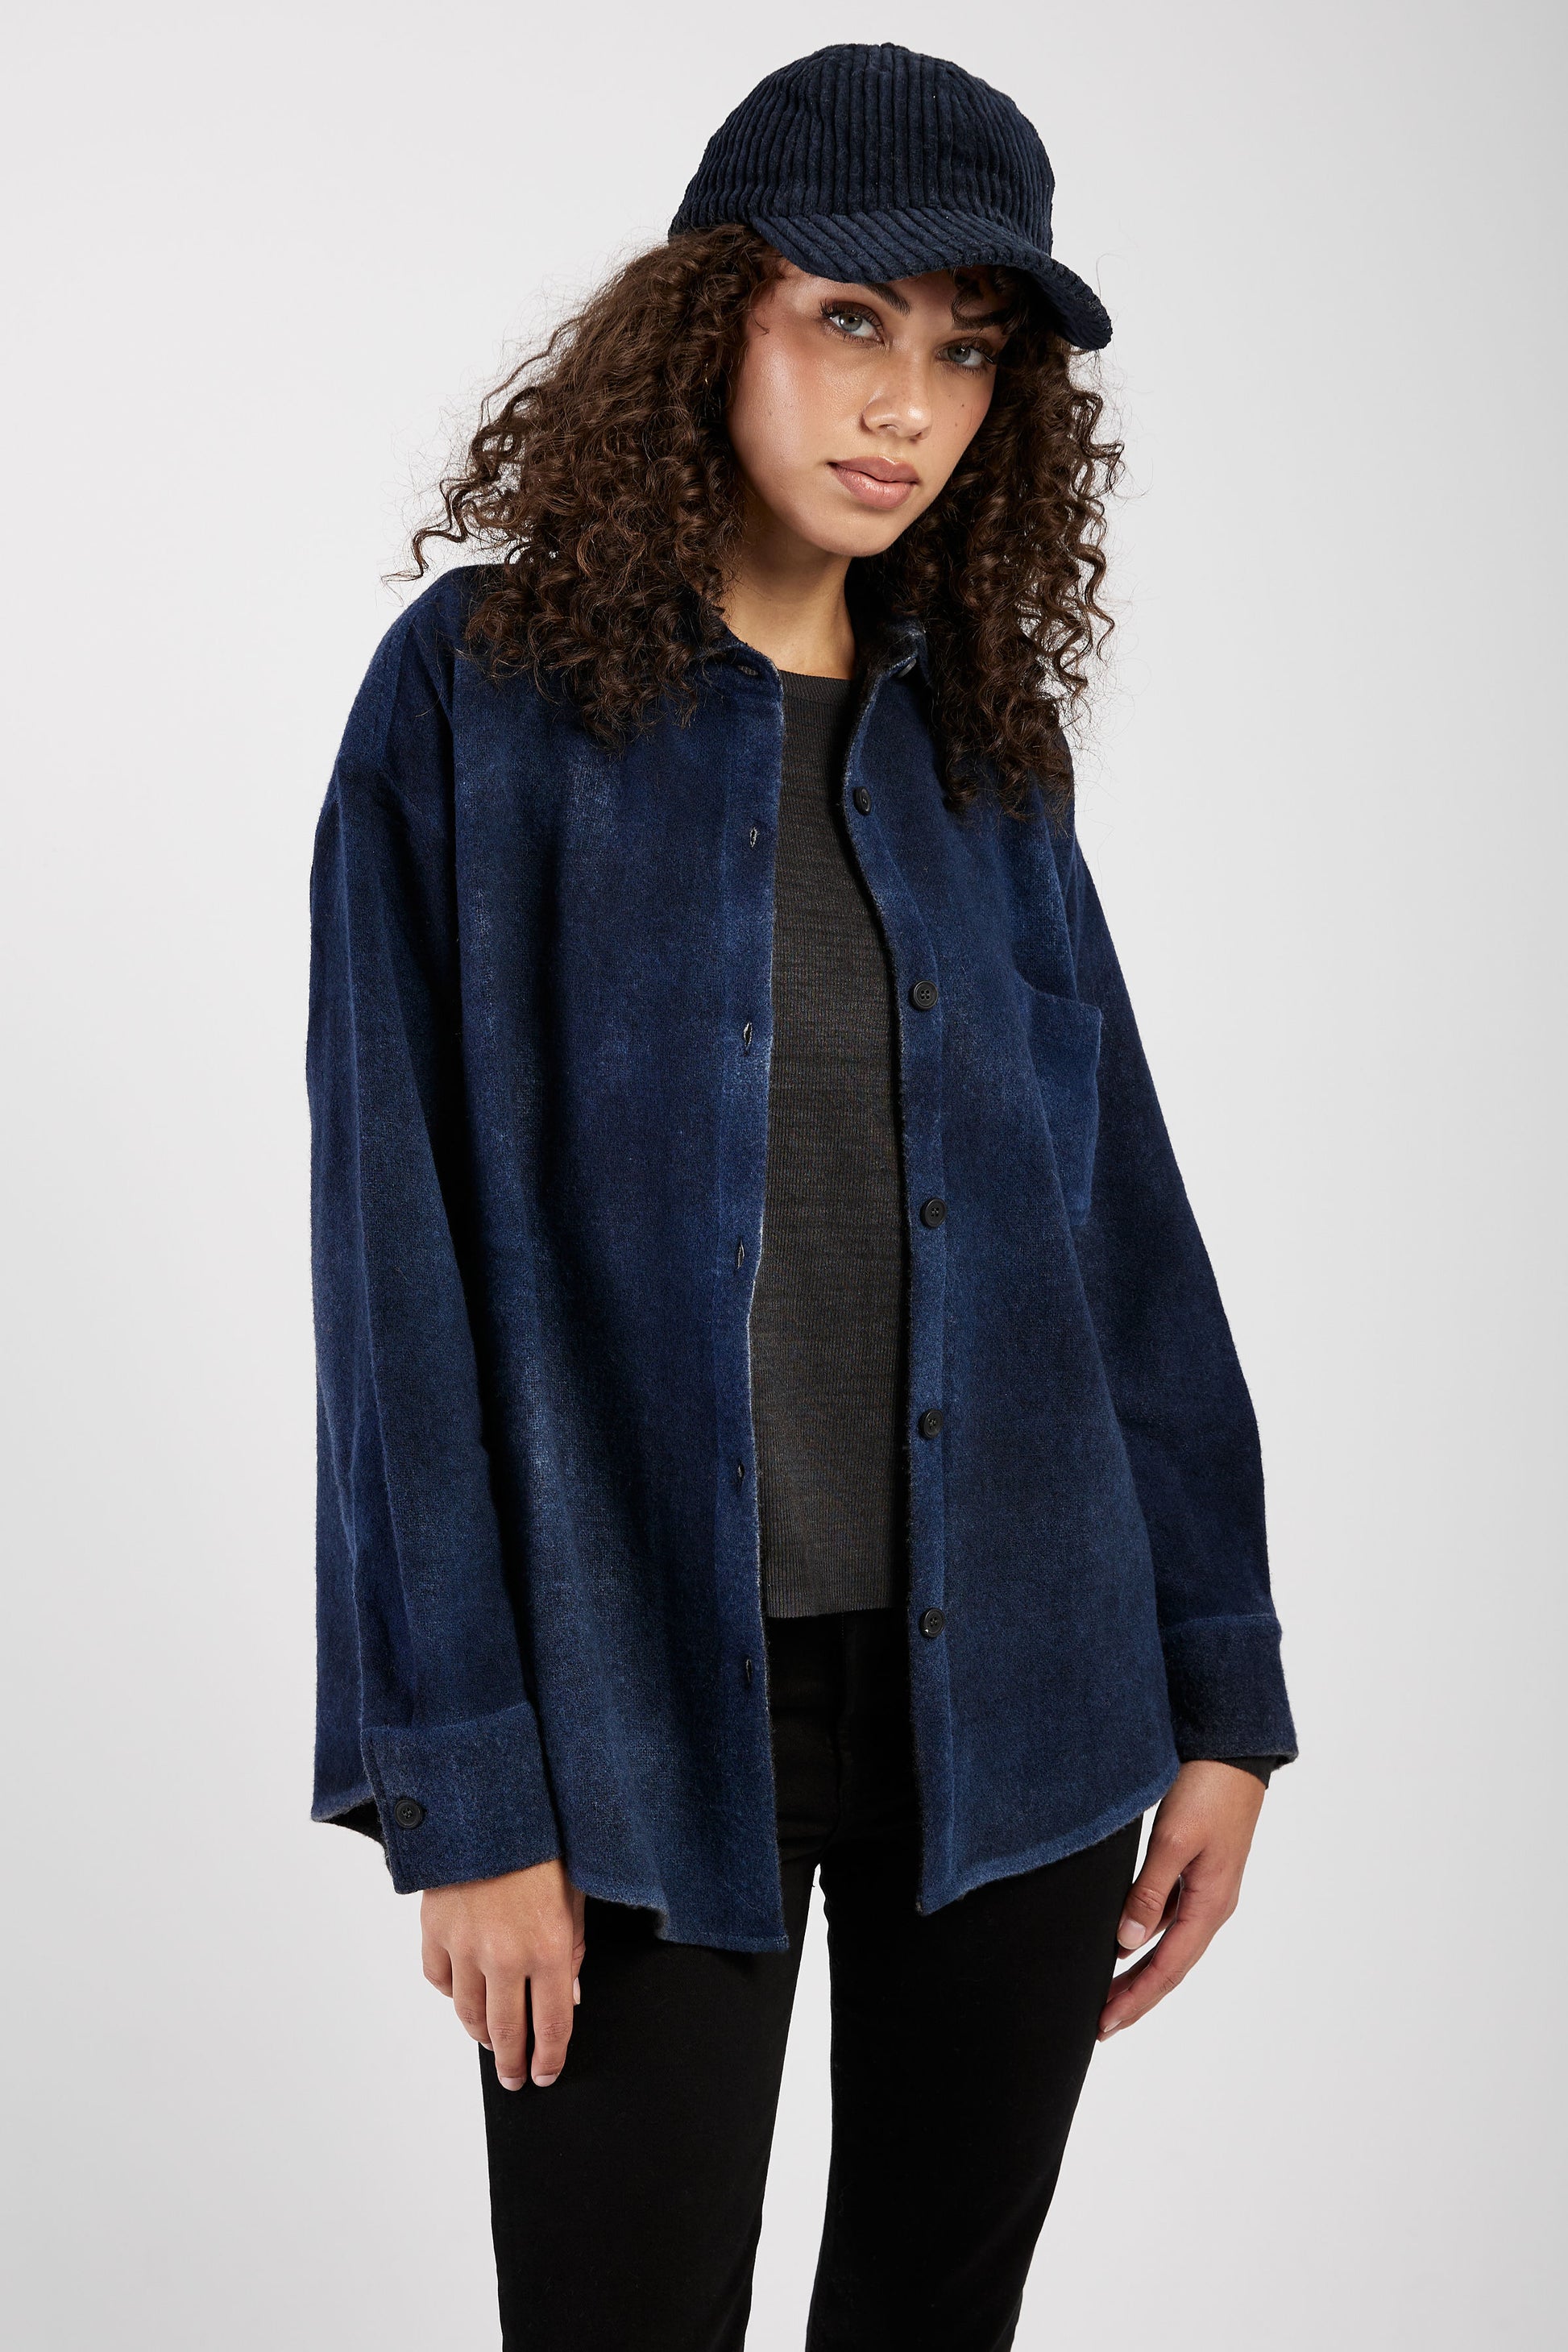 AVANT TOI Cashmere Wool Knit Shirt in Midnight